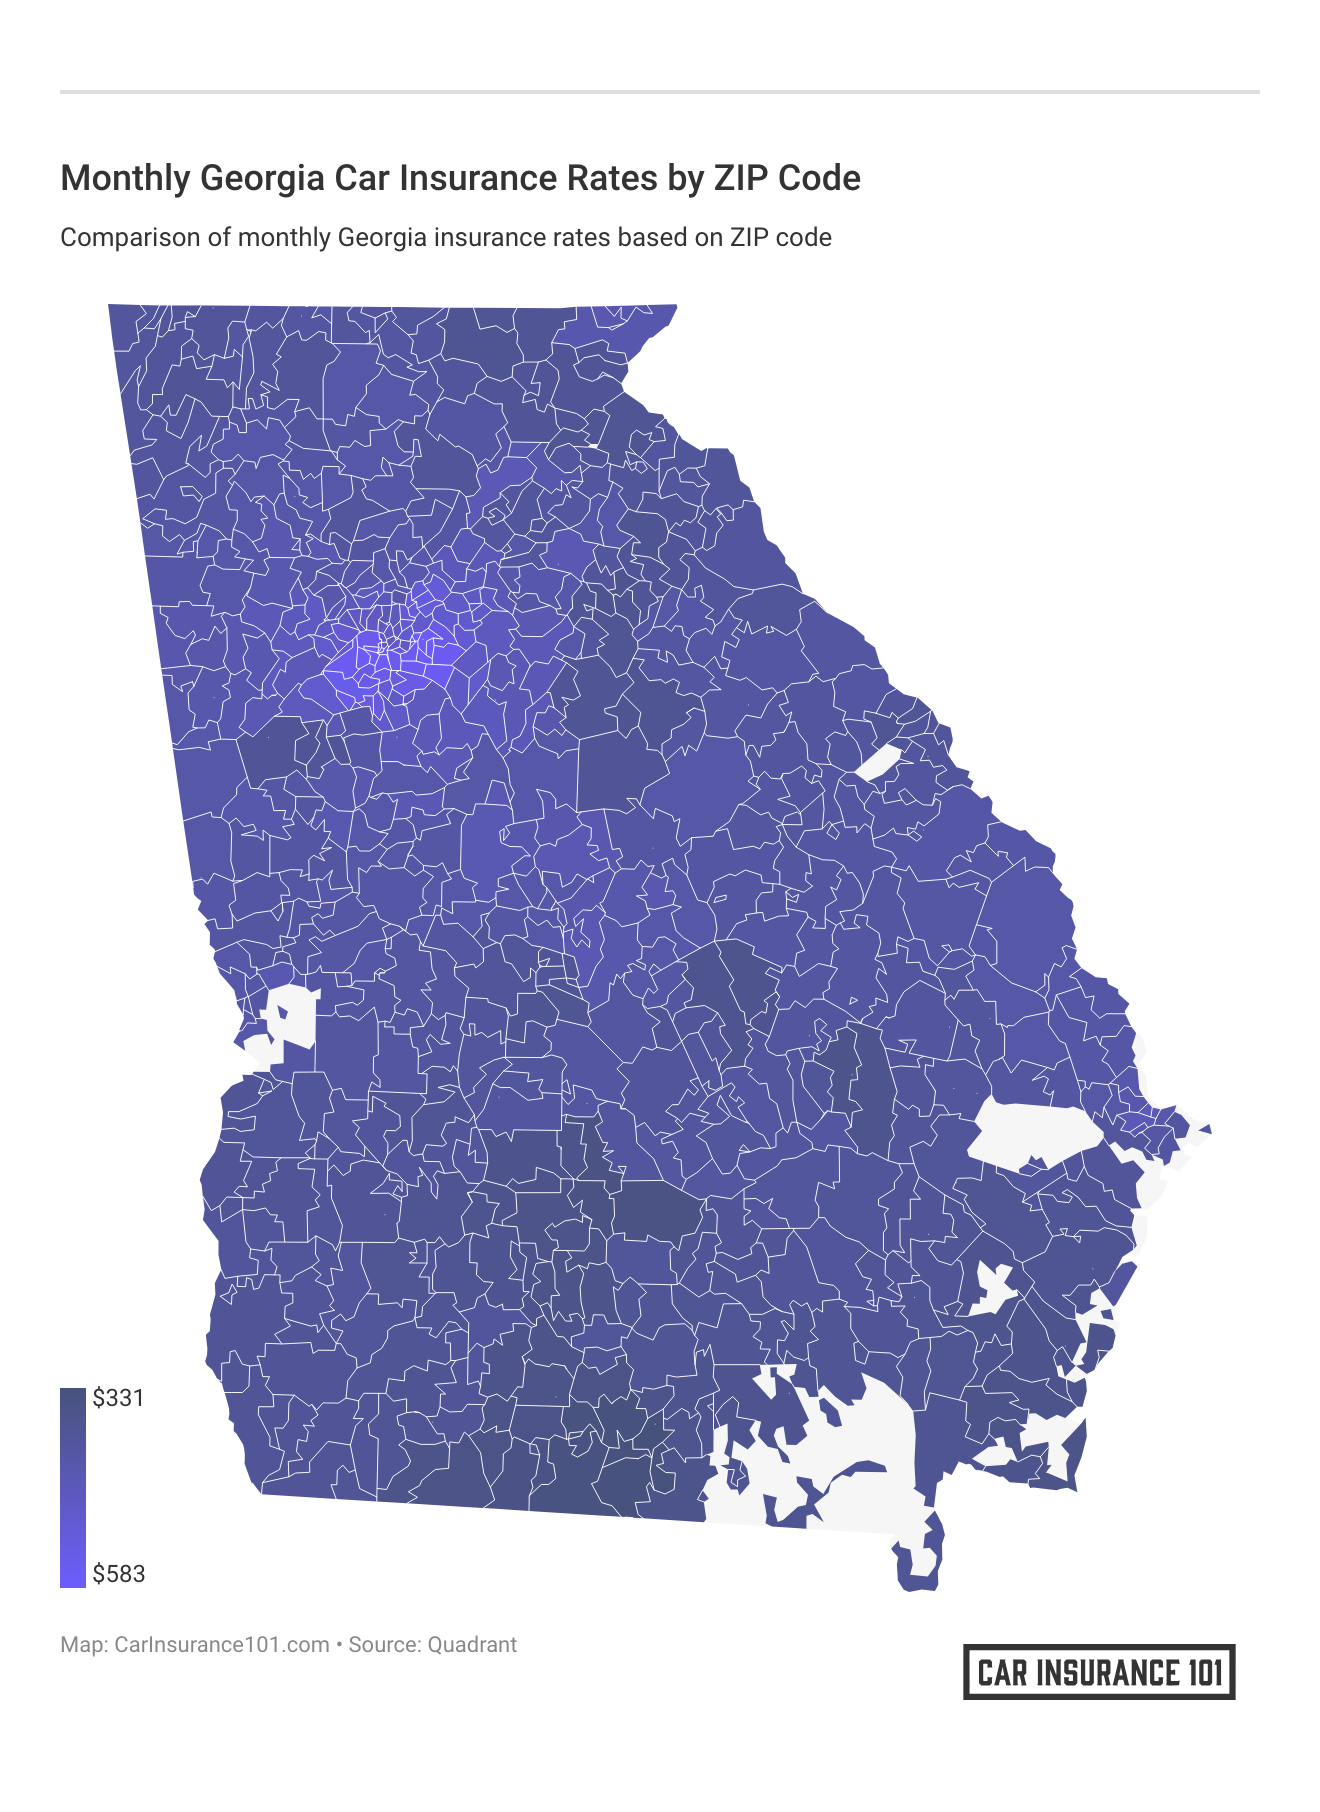 <h3>Monthly Georgia Car Insurance Rates by ZIP Code</h3>